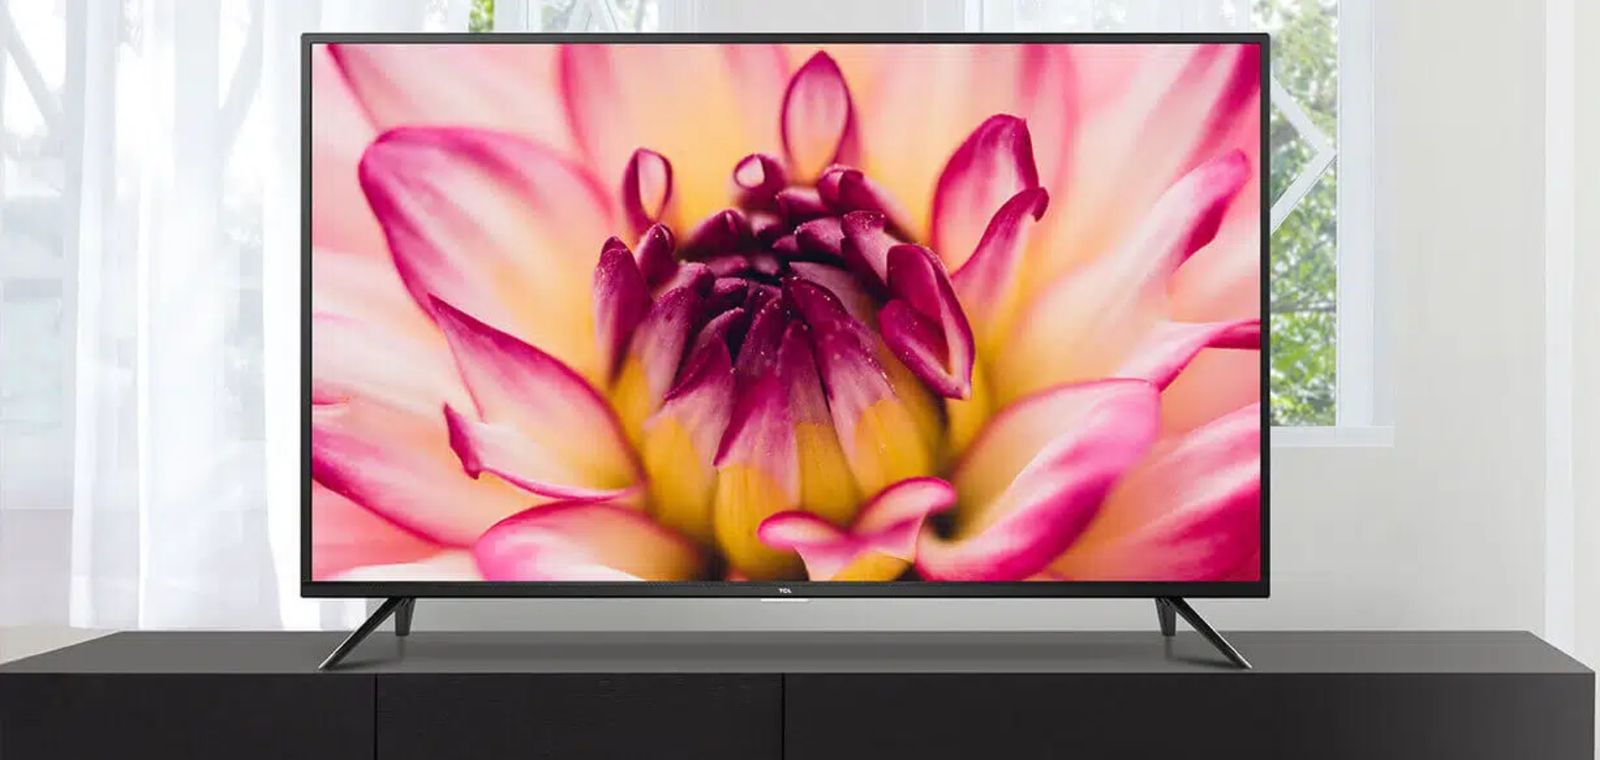 A black TV featuring a pink, white, and yellow flower is placed on top of a black cabinet.